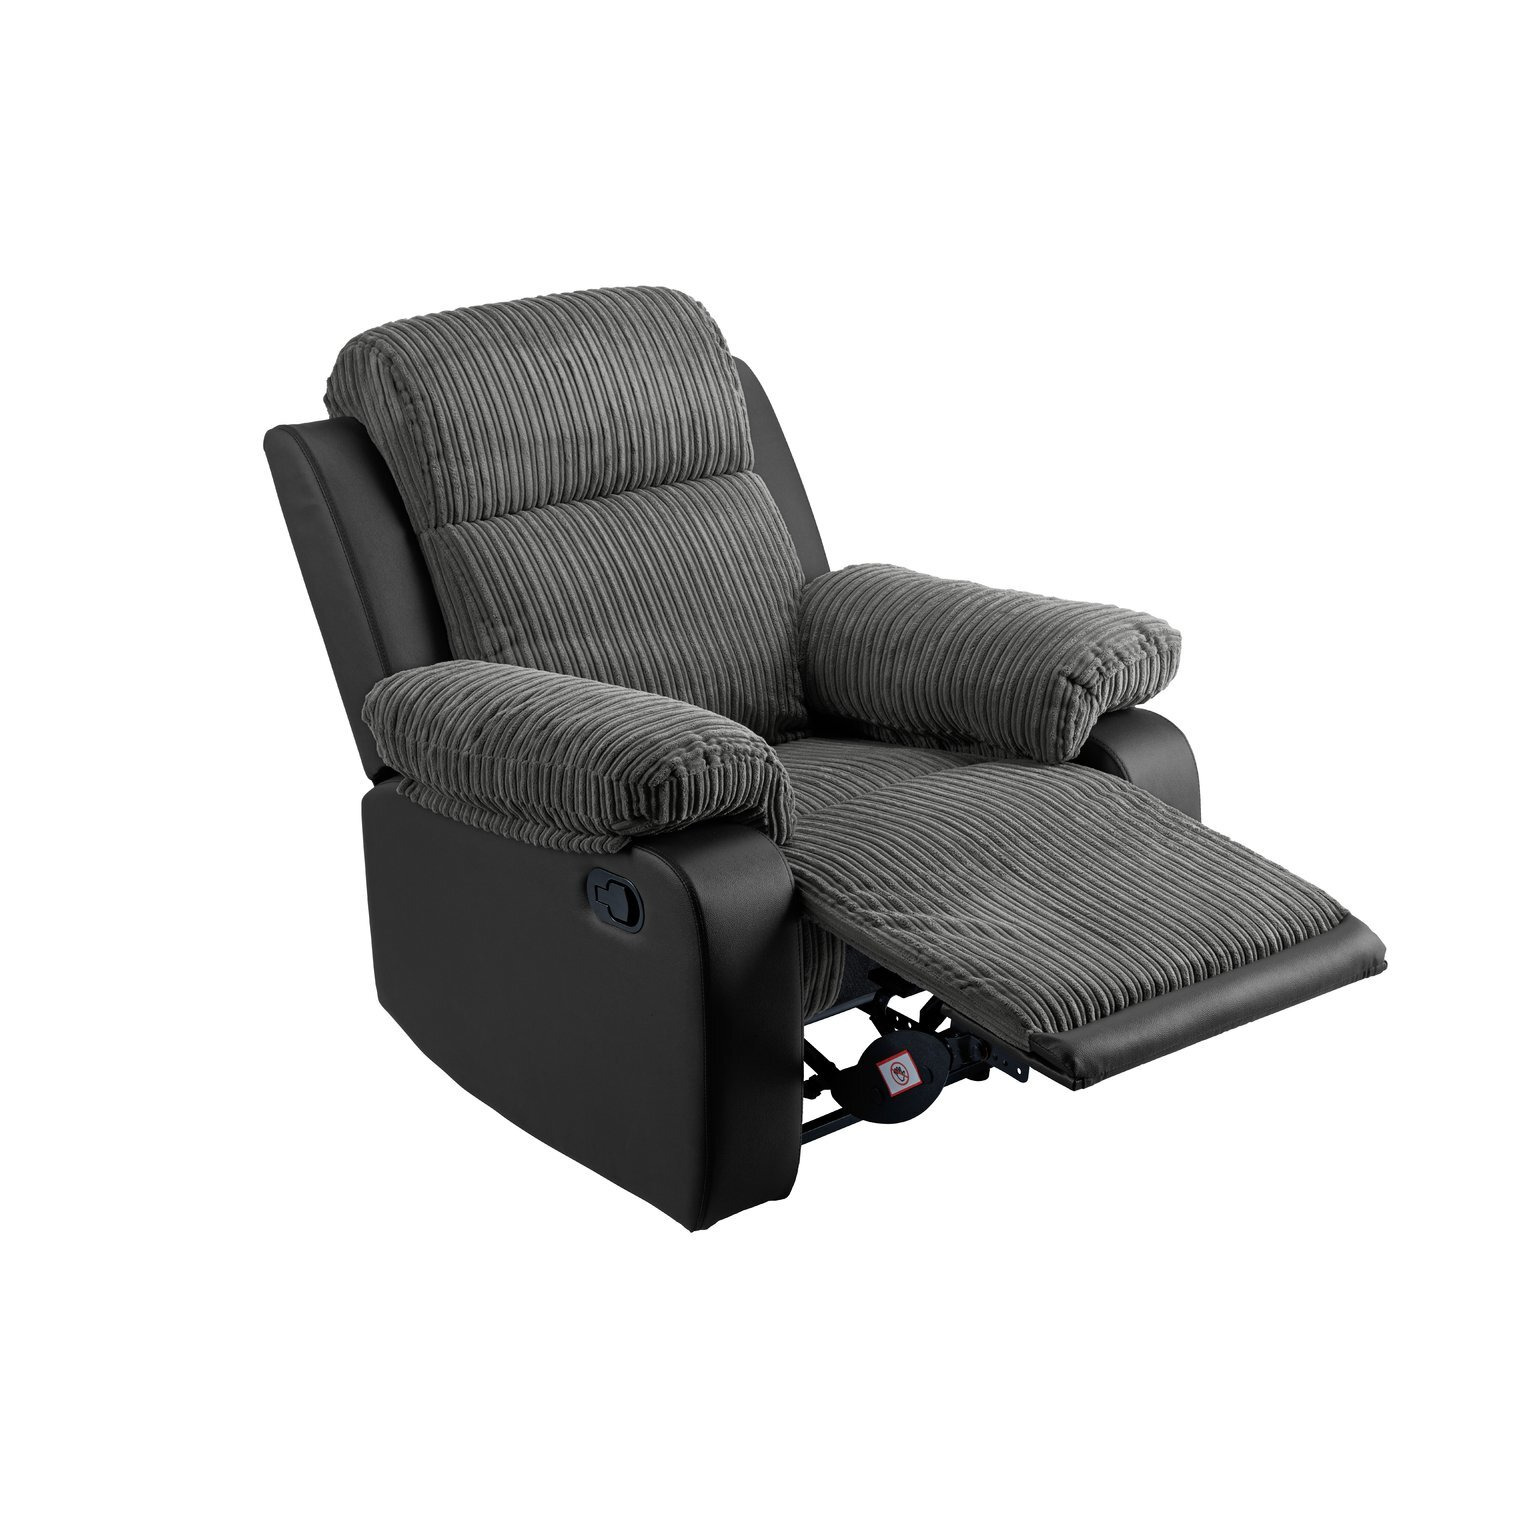 Argos Home Bradley Fabric Manual Recliner Chair - Charcoal - image 1